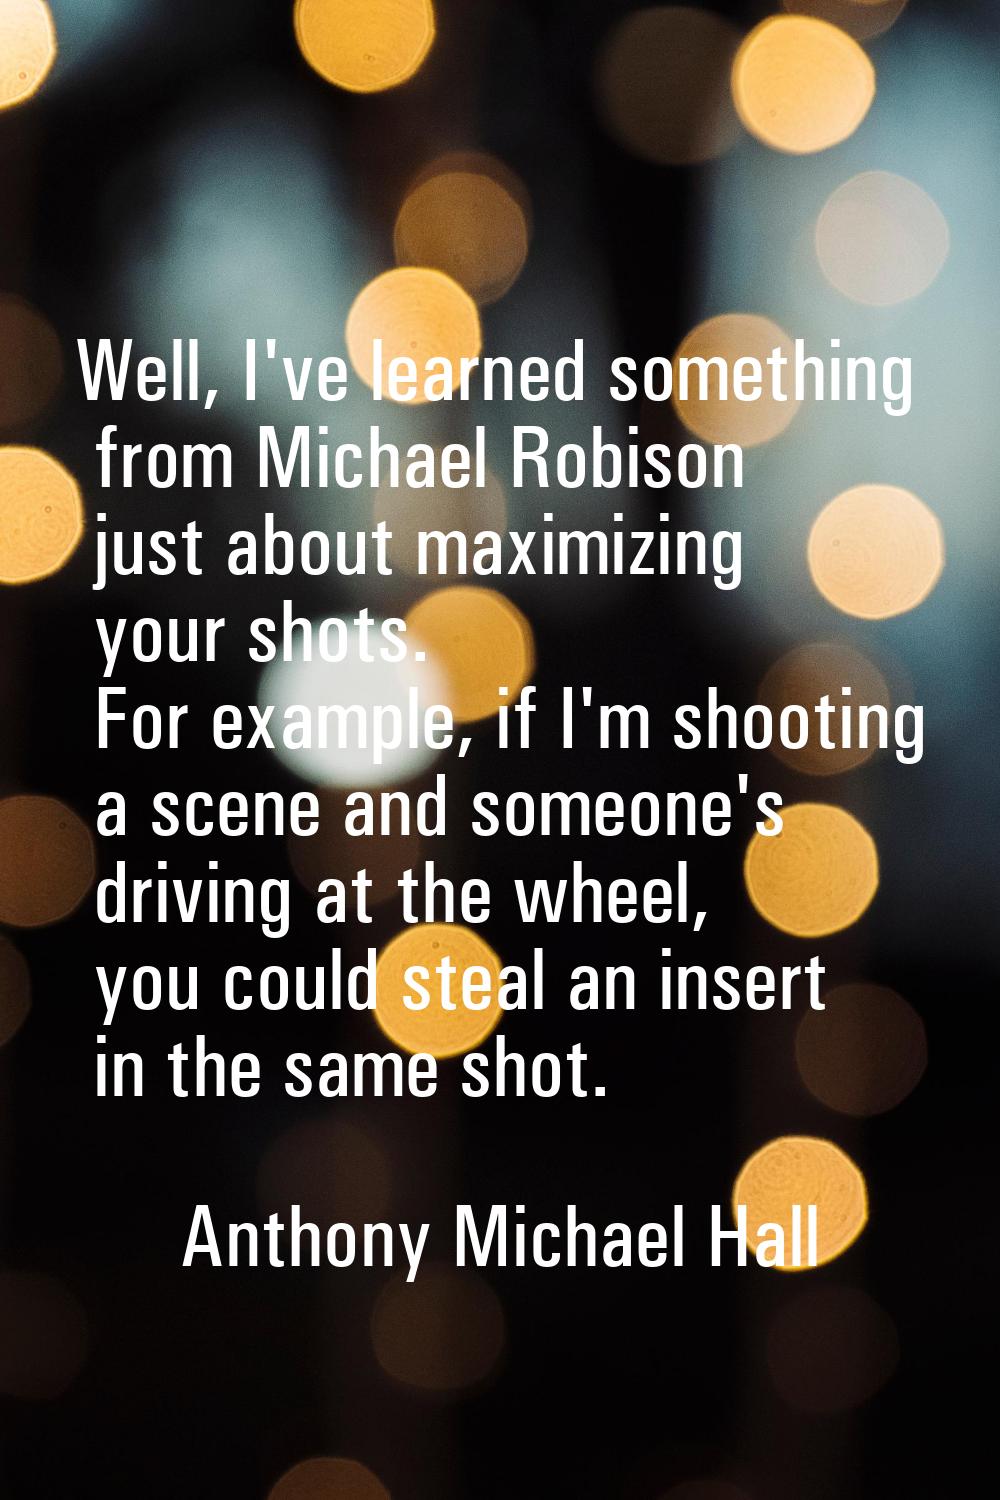 Well, I've learned something from Michael Robison just about maximizing your shots. For example, if